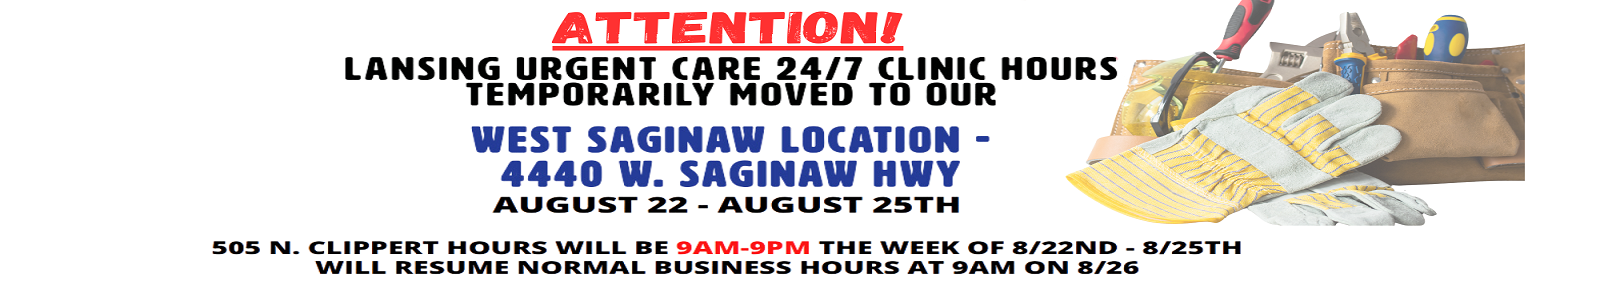 Clinic 24/7 Care Moved to West Clinic This Week